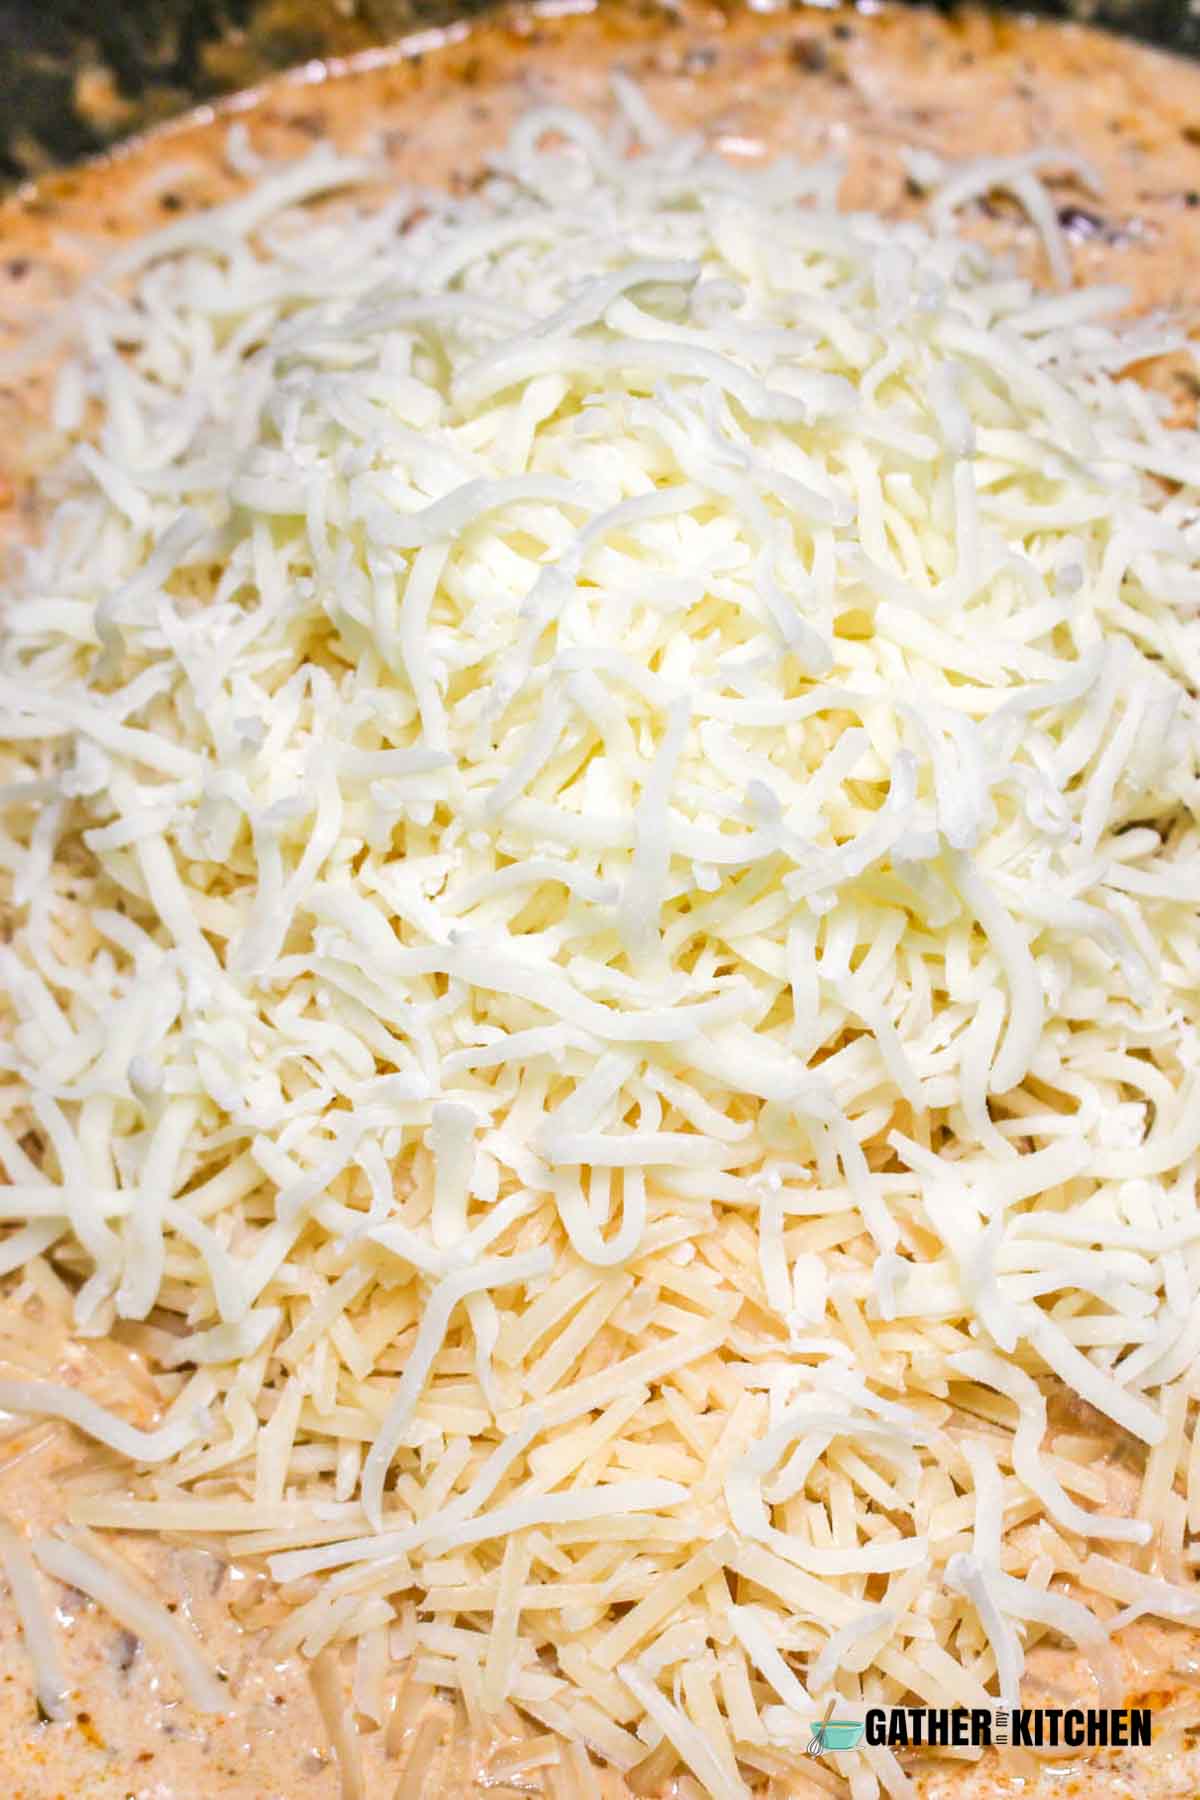 Parmesan cheese added to pasta sauce mixture.